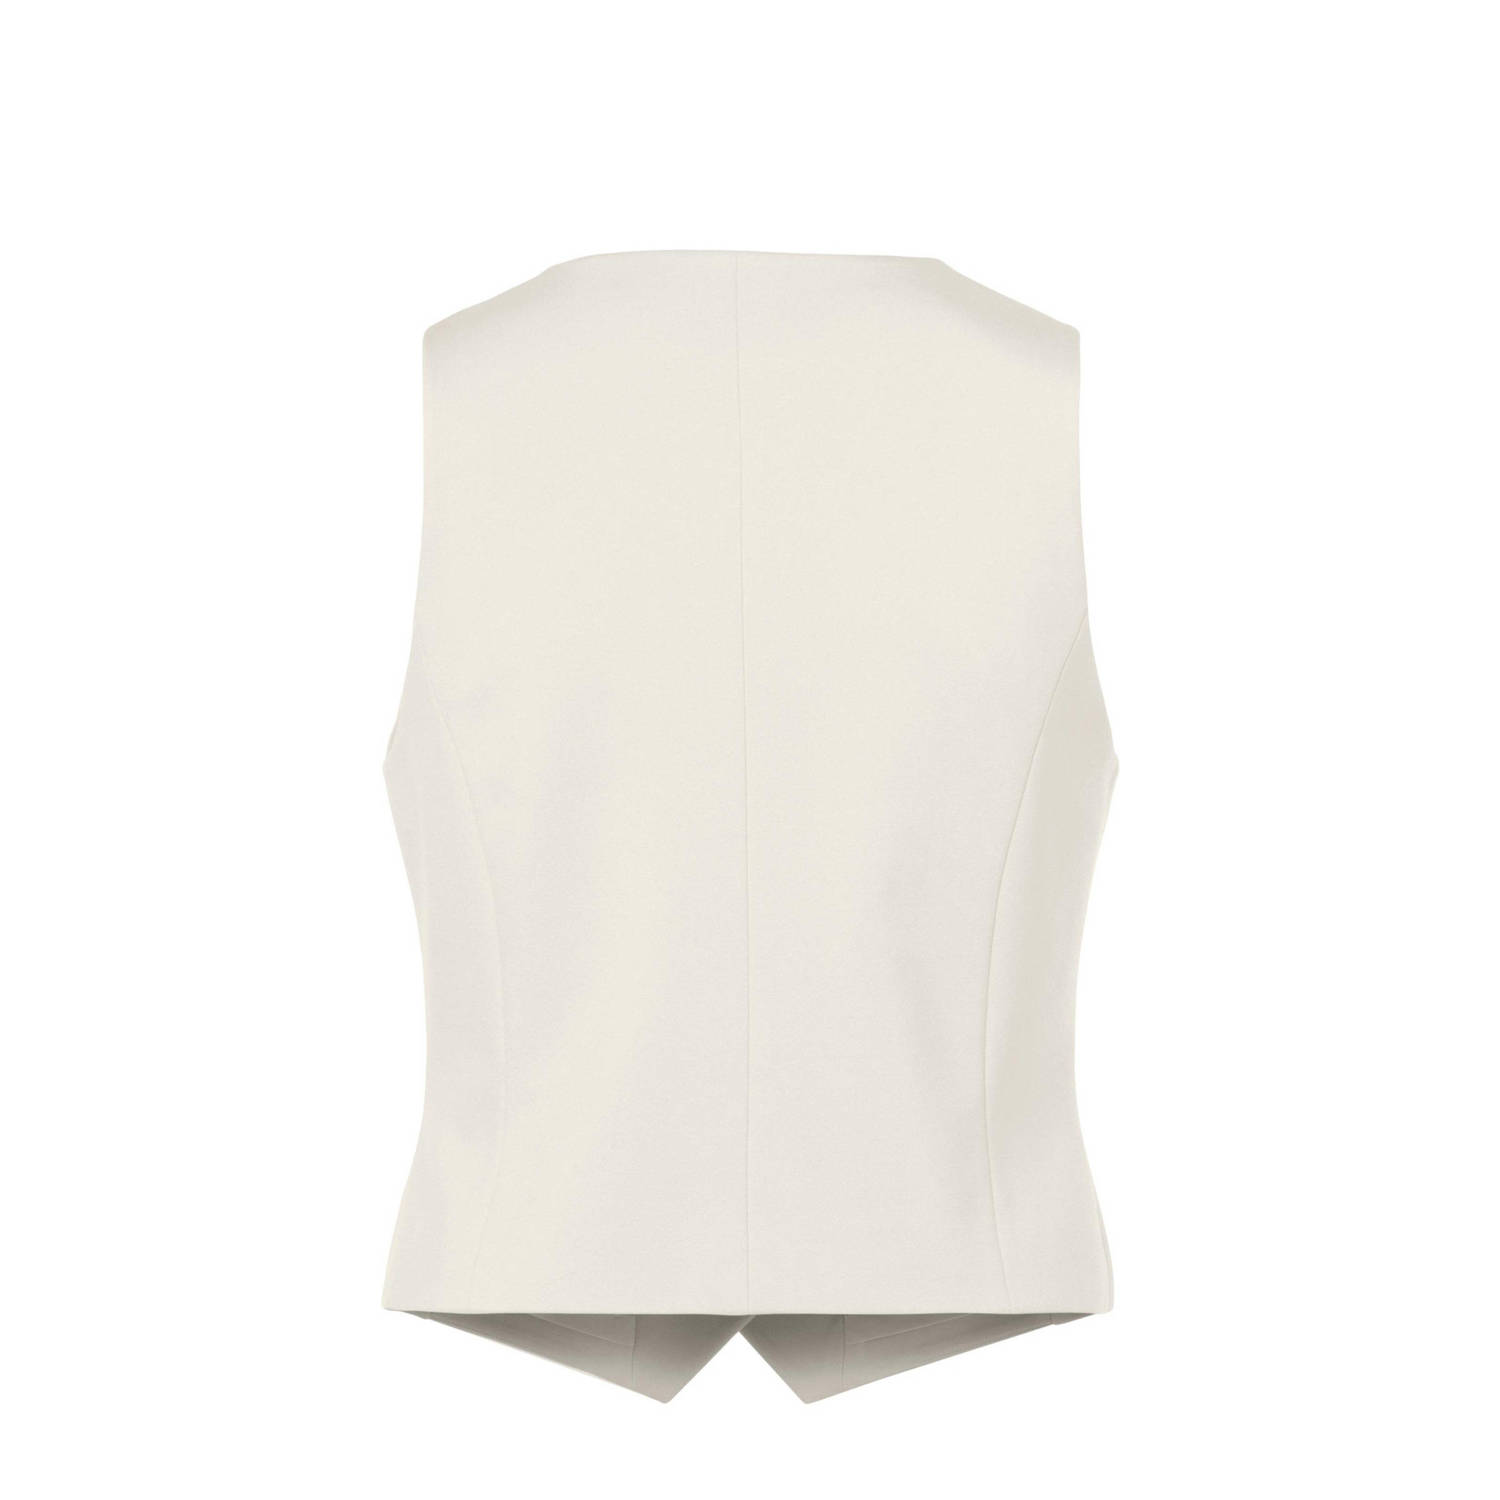 Beaumont gilet Parker offwhite